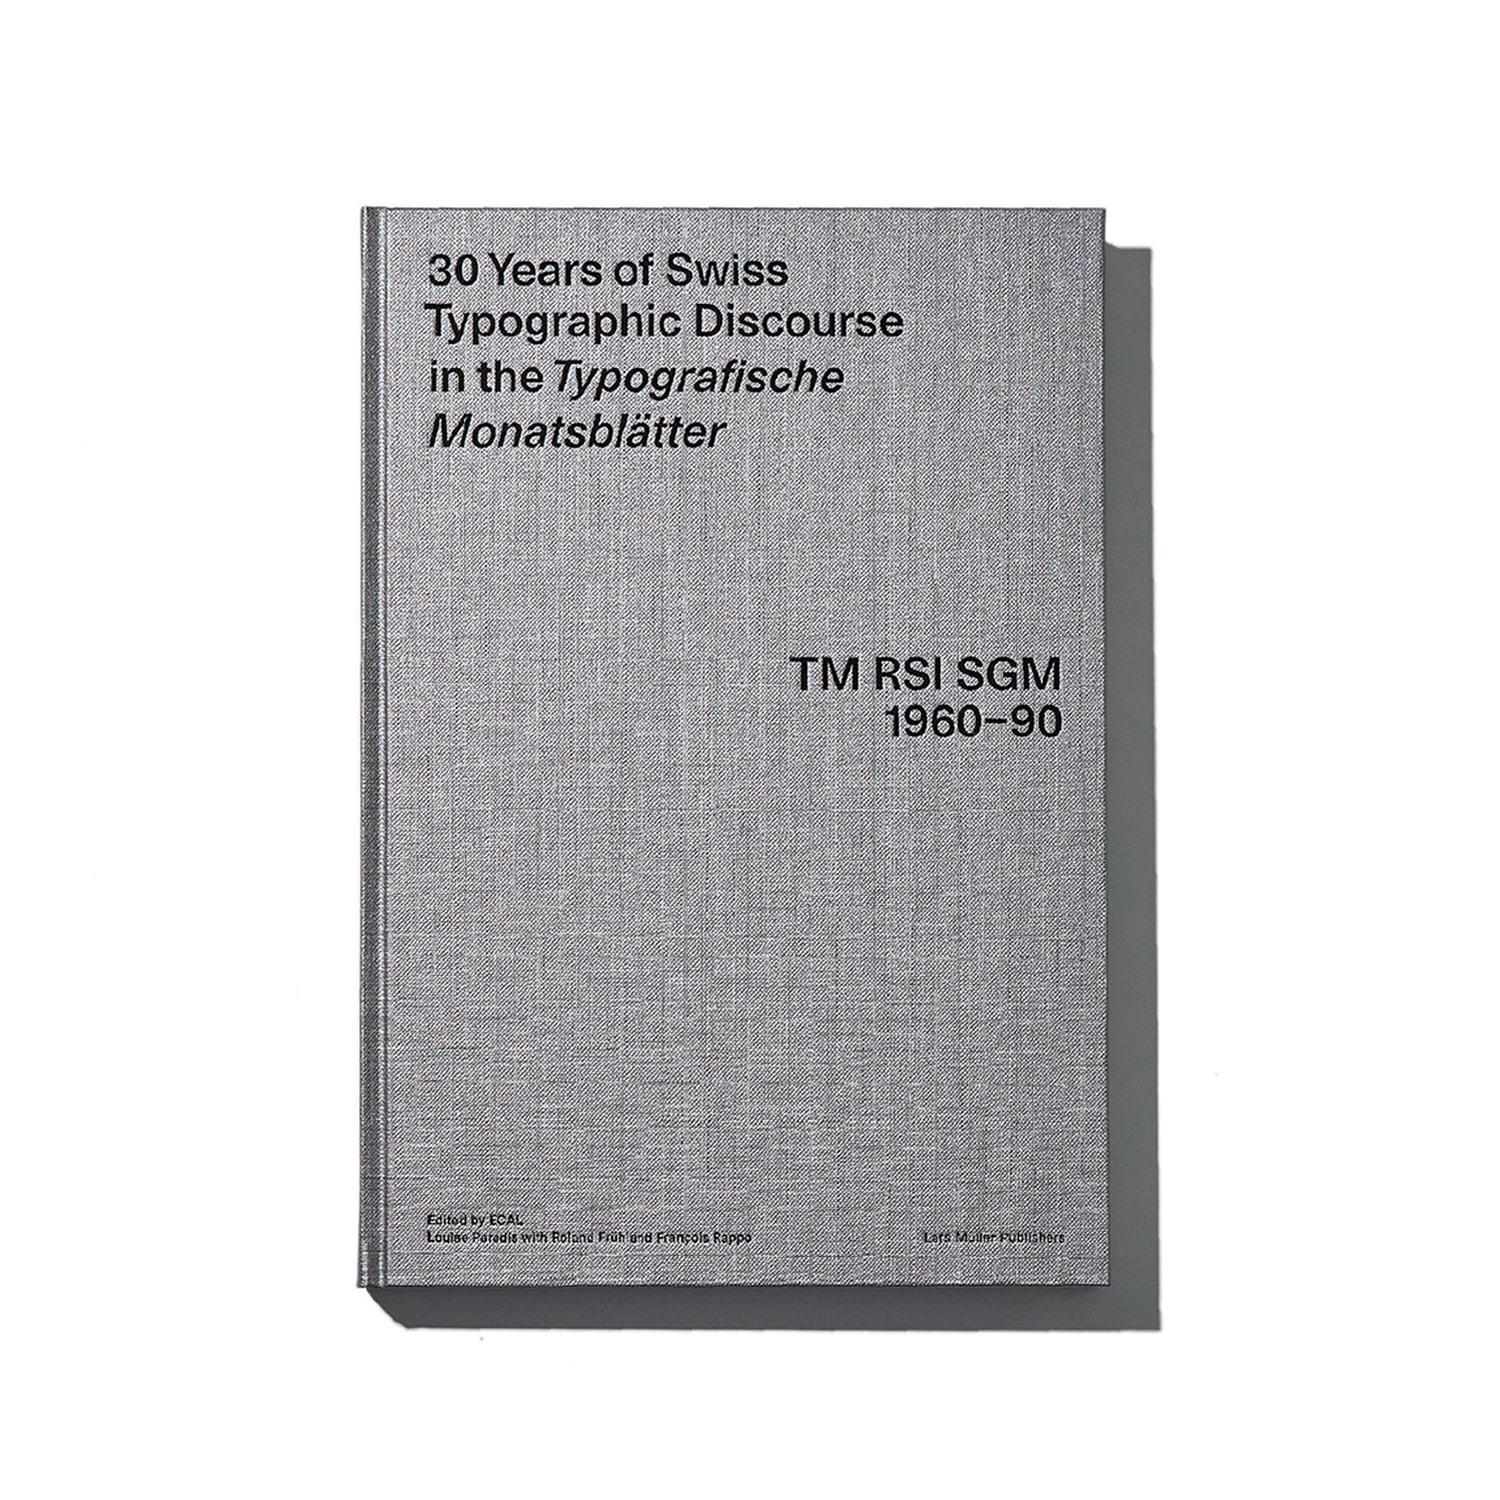 30 YEARS OF SWISS TYPOGRAPHIC DISCOURSE (ROLAND FRUH)